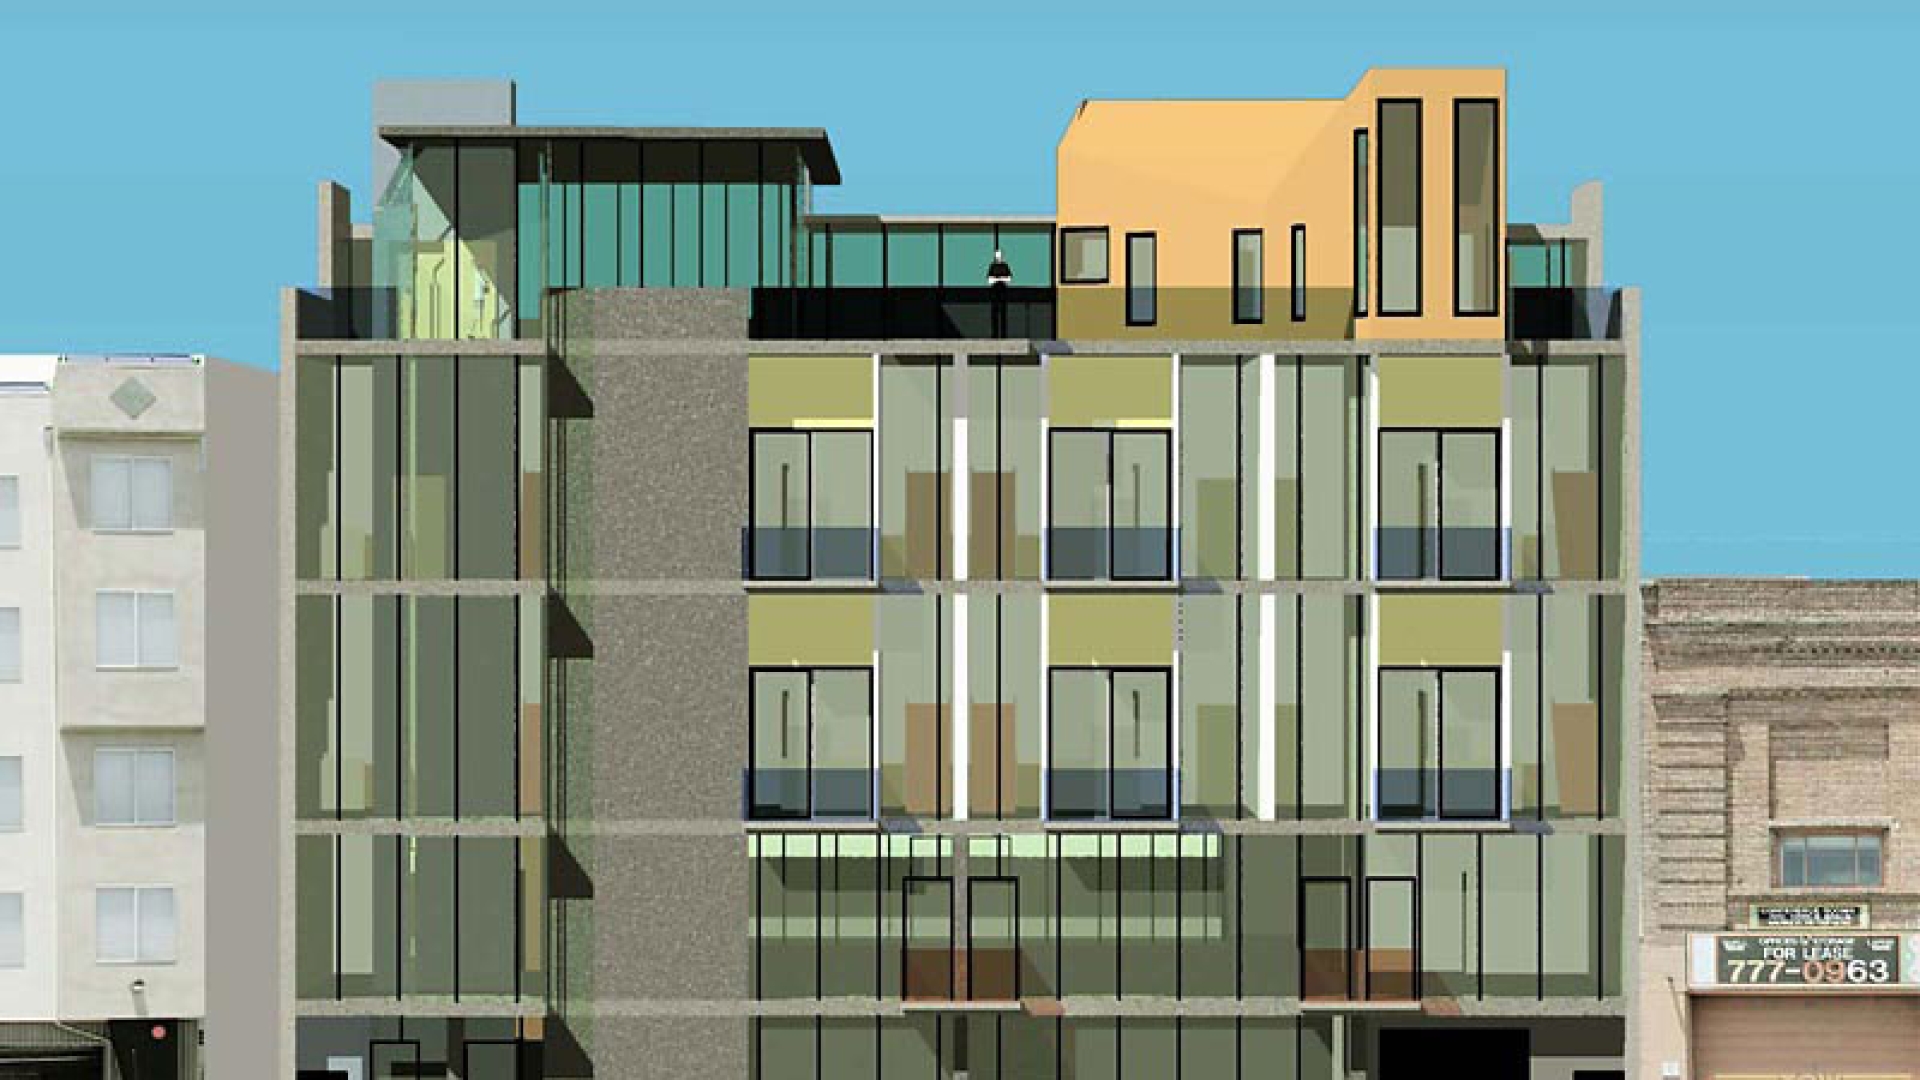 Exterior rendering of the elevation on Townsend Street for  370 Townsend Street.